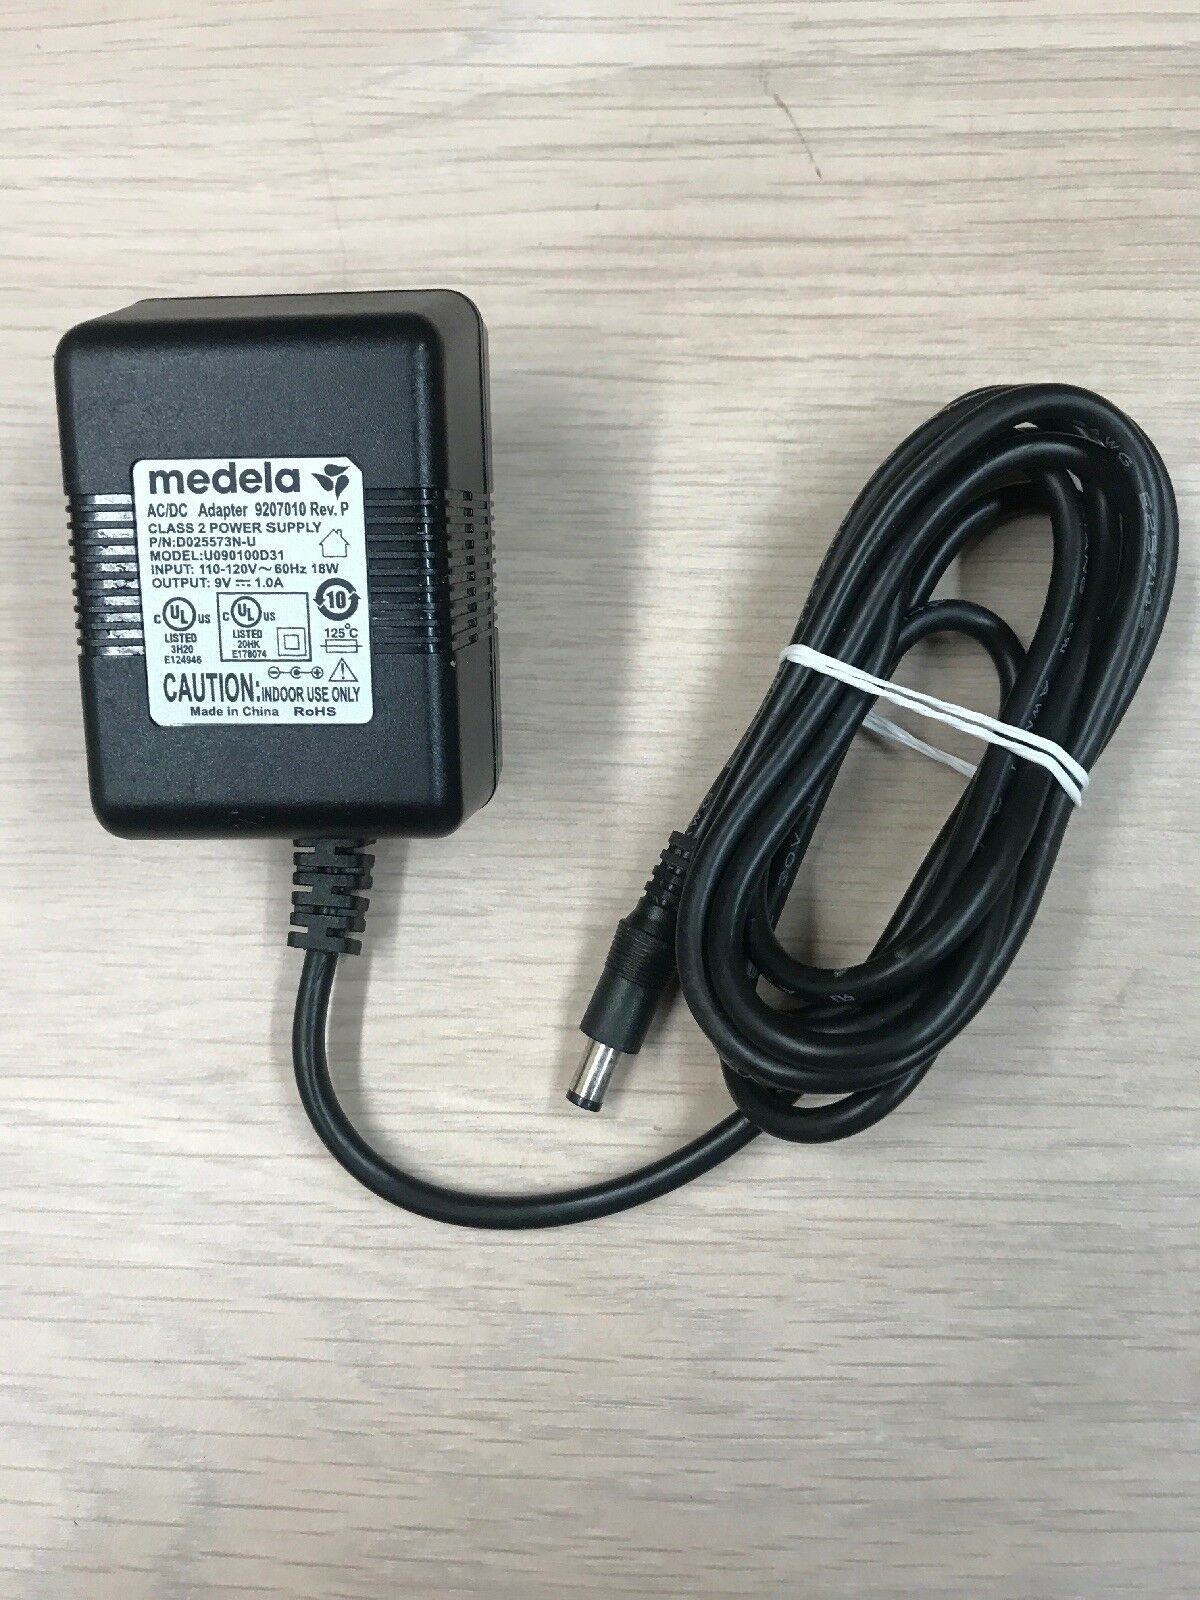 *Brand NEW* 9V DC 1.0A AC Adapter Medela U090100D31 Charger Power Supply